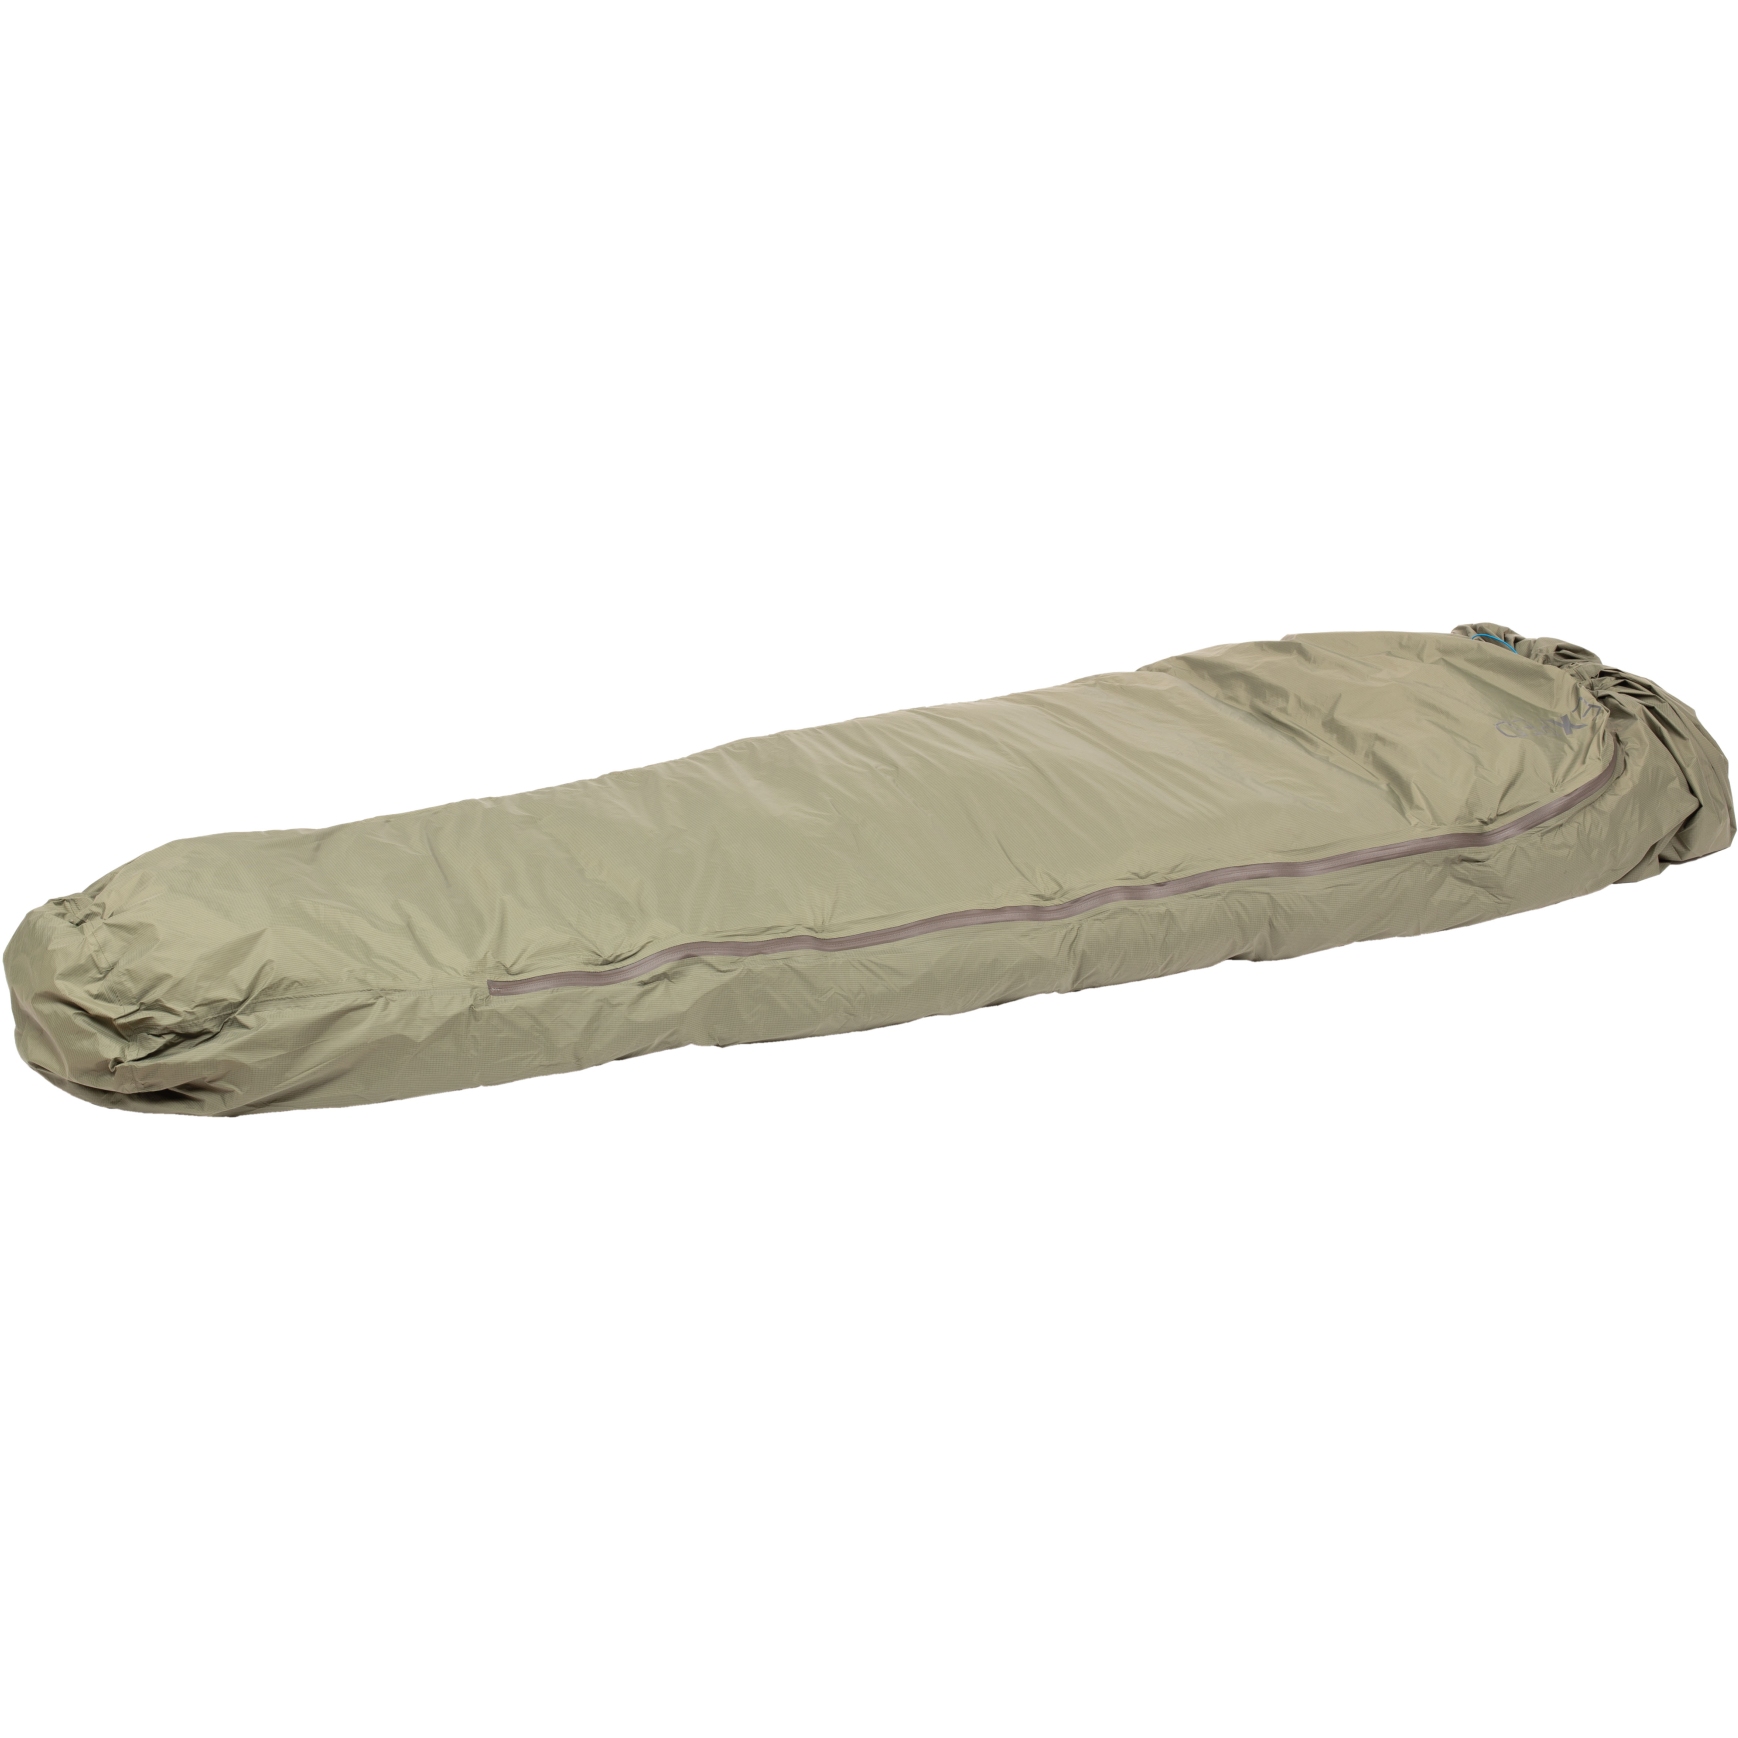 Image of Exped Cover Pro Sleeping Bag Cover - M - olive grey/charcoal